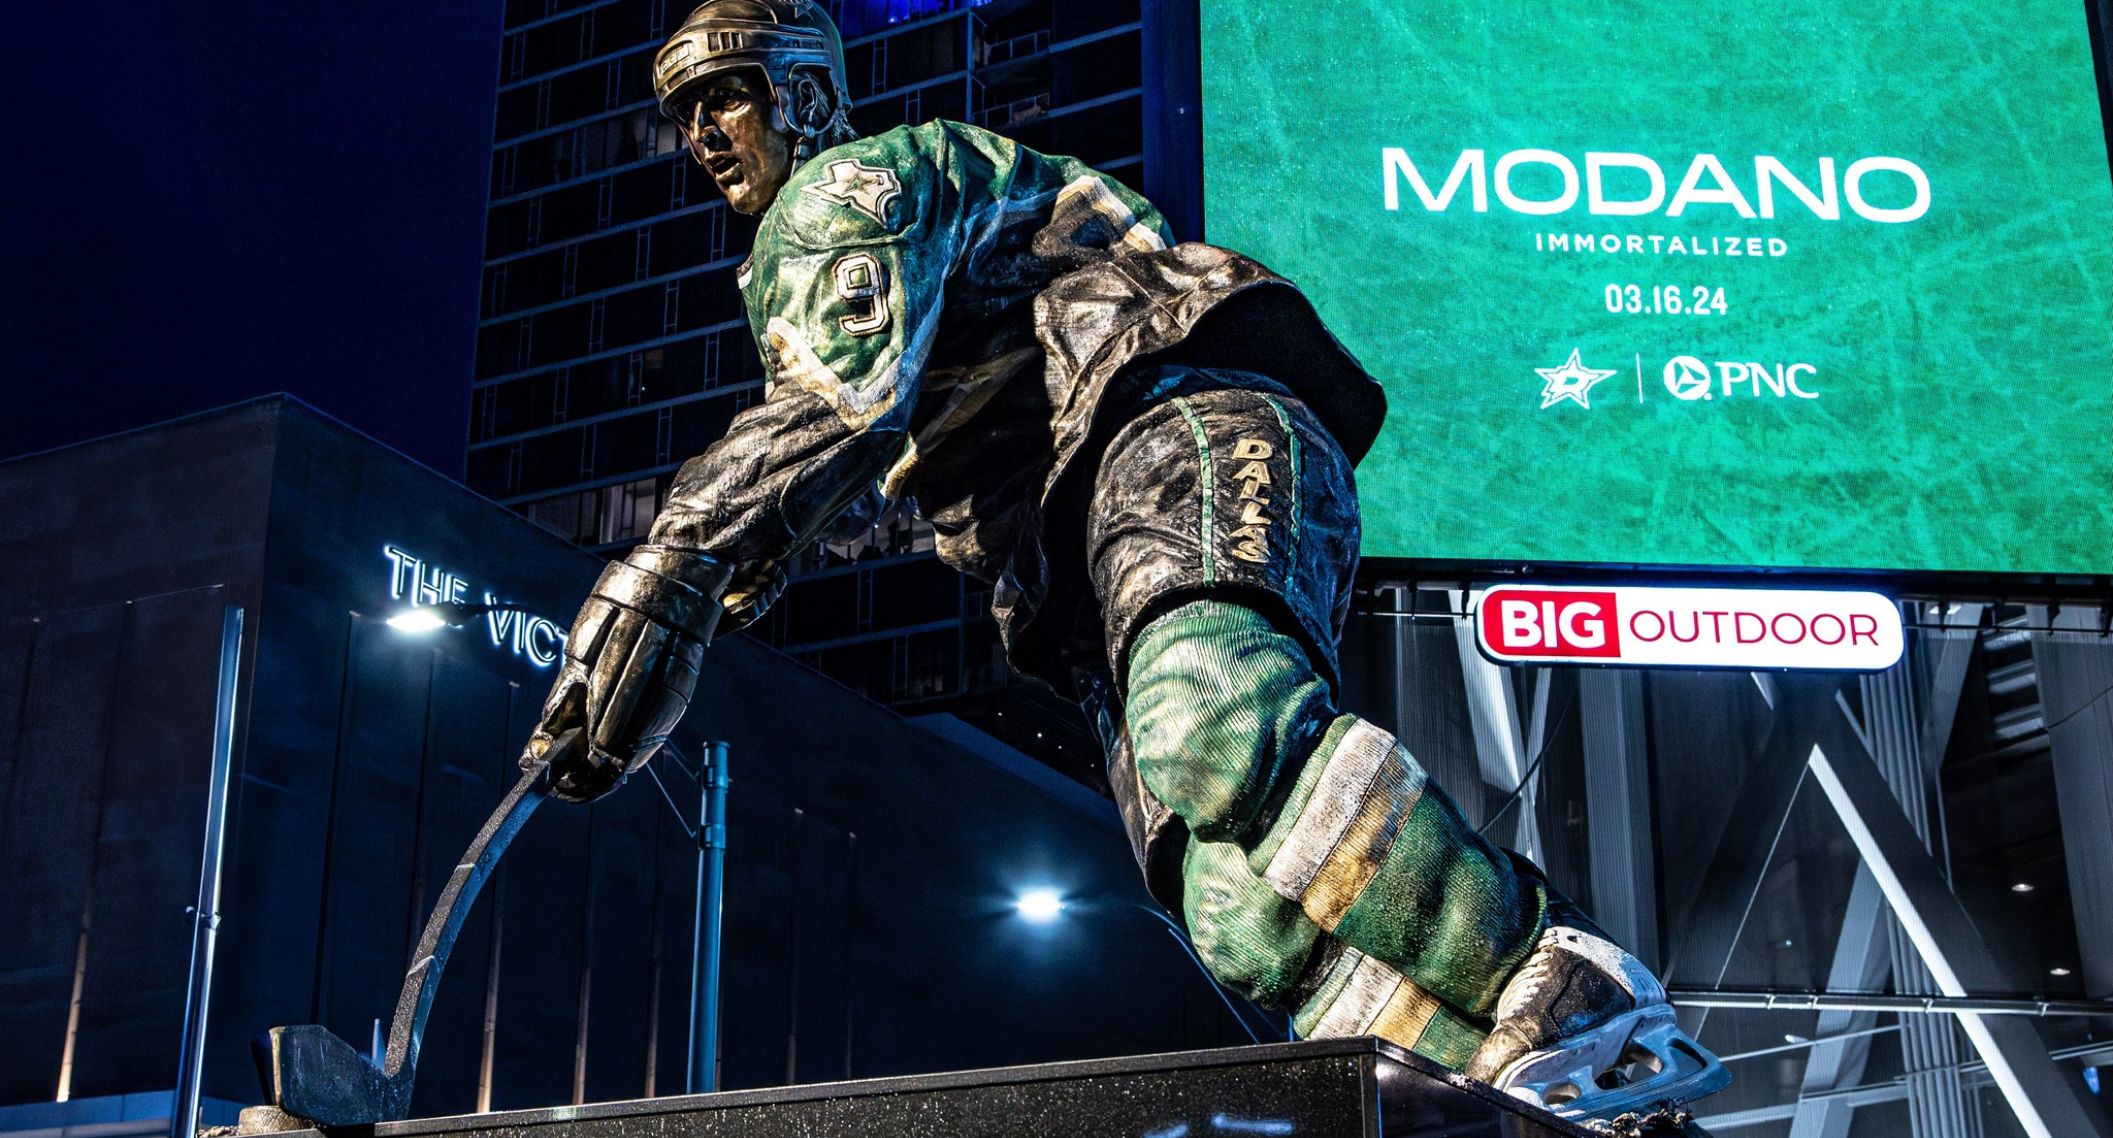 Mike Modano statue outside the American Airlines Center